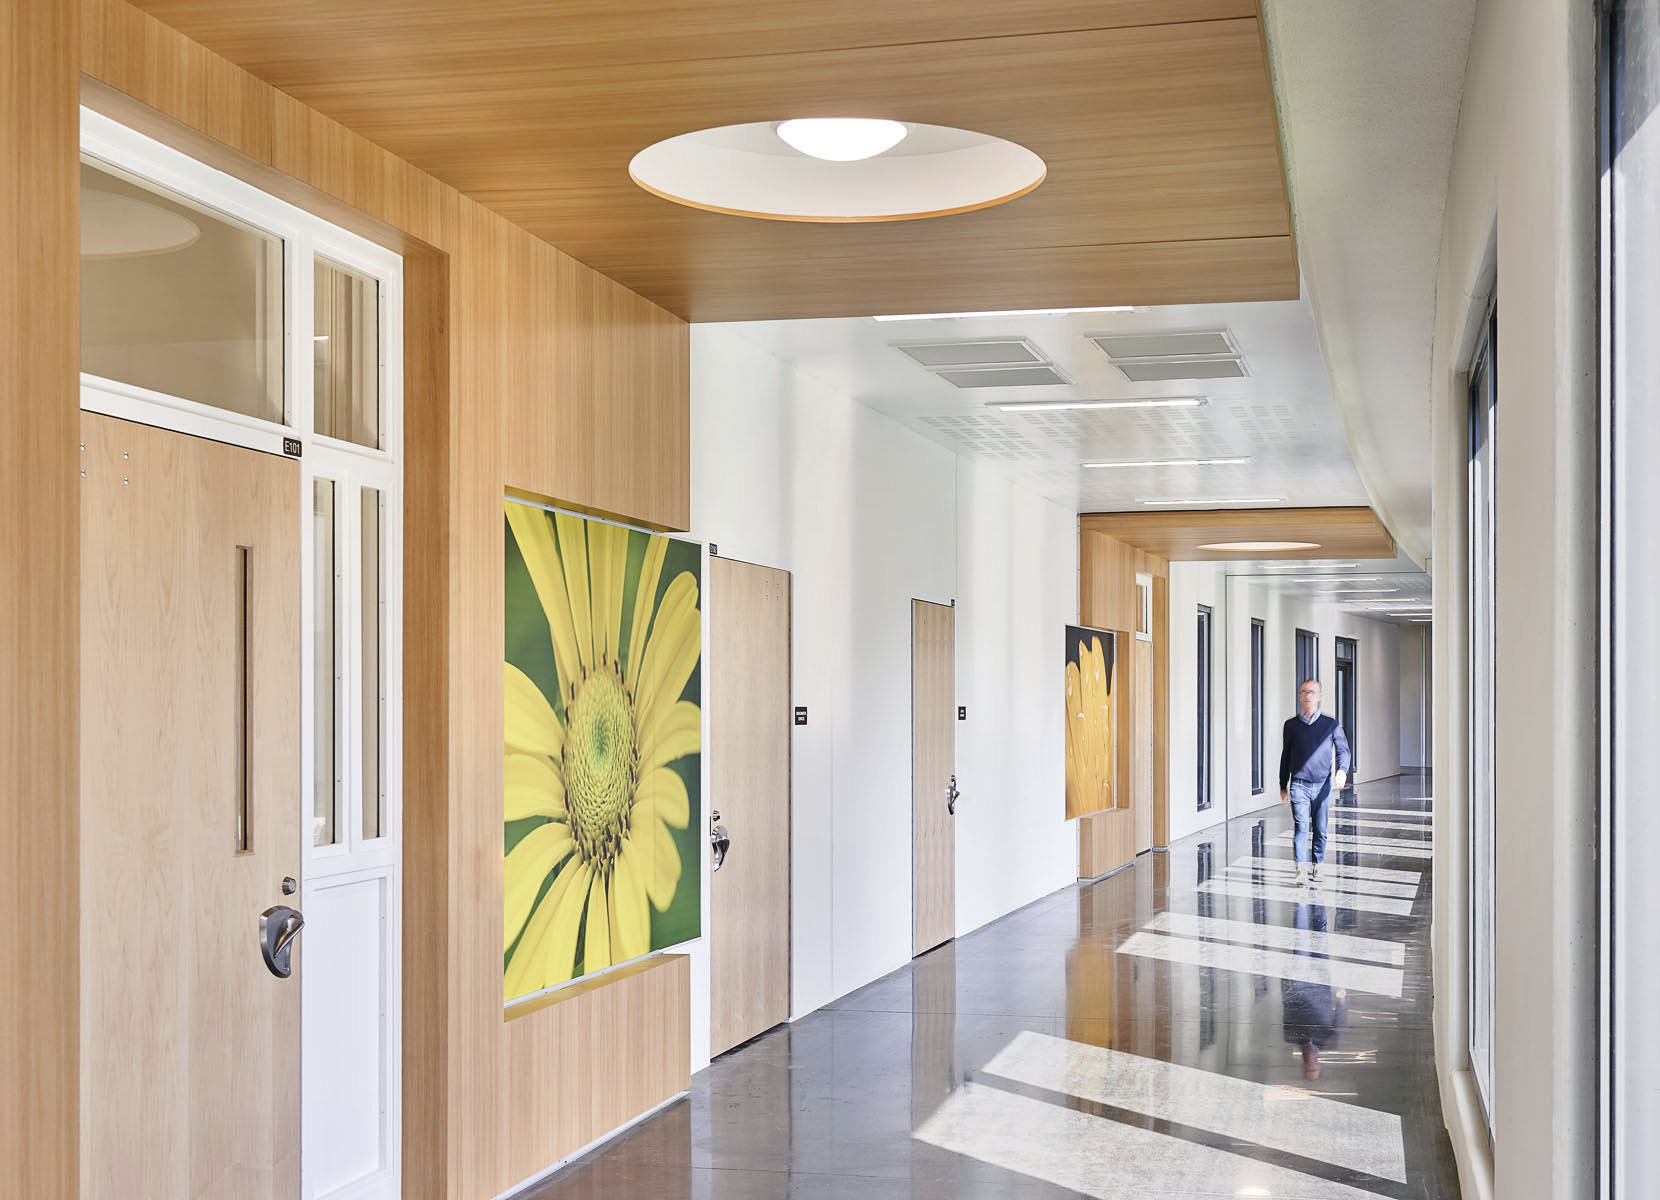 light-filled hallways at the Nixon Forensic Center at Fulton State Hospital create a calm ambiance for patients 